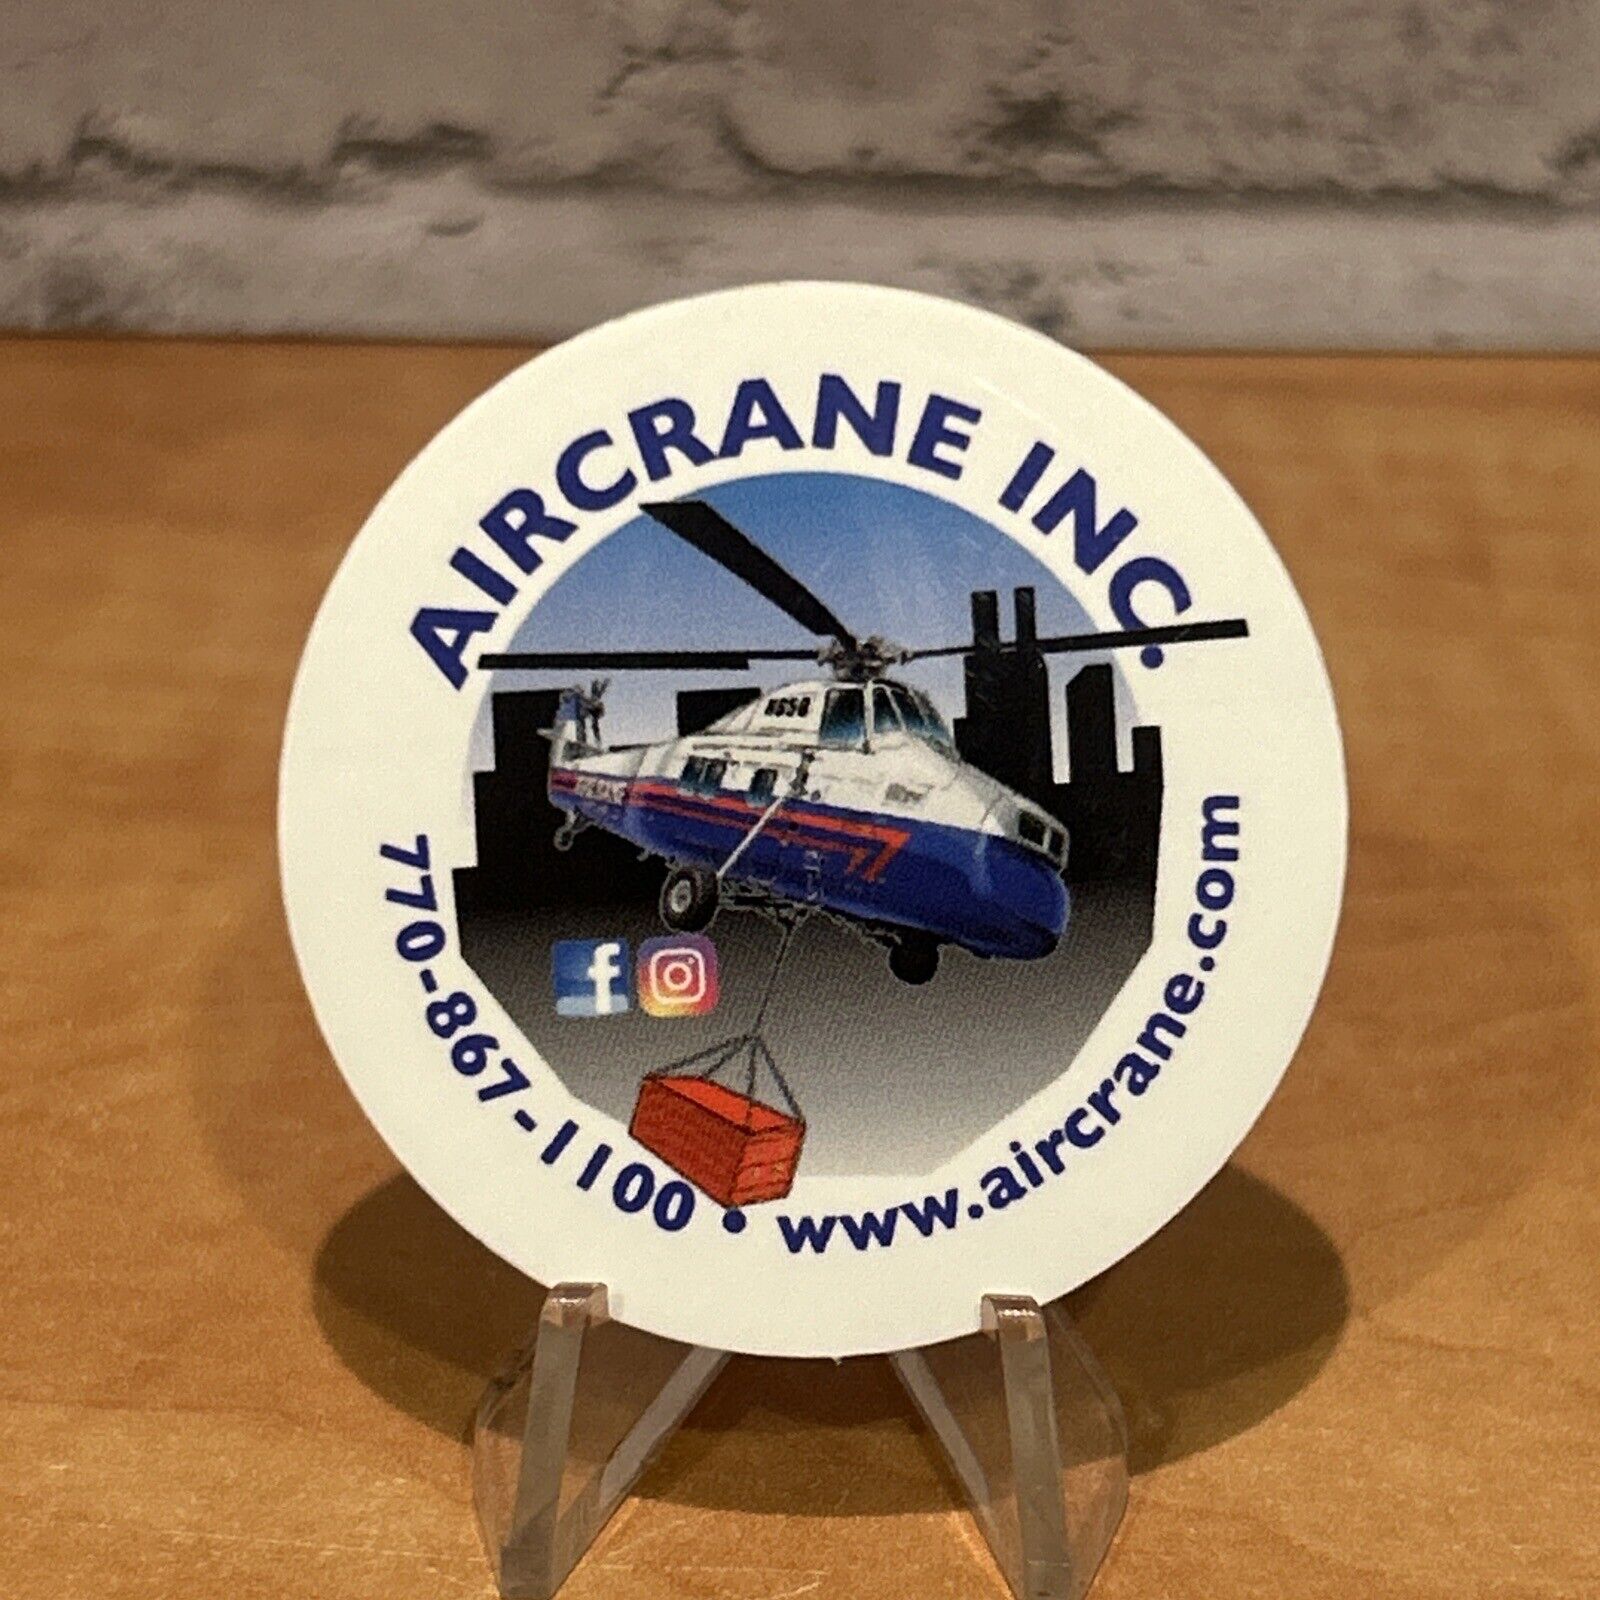 Aircrane Inc.  Air Crane Helicopter Lift Operating Engineers Hardhat Sticker